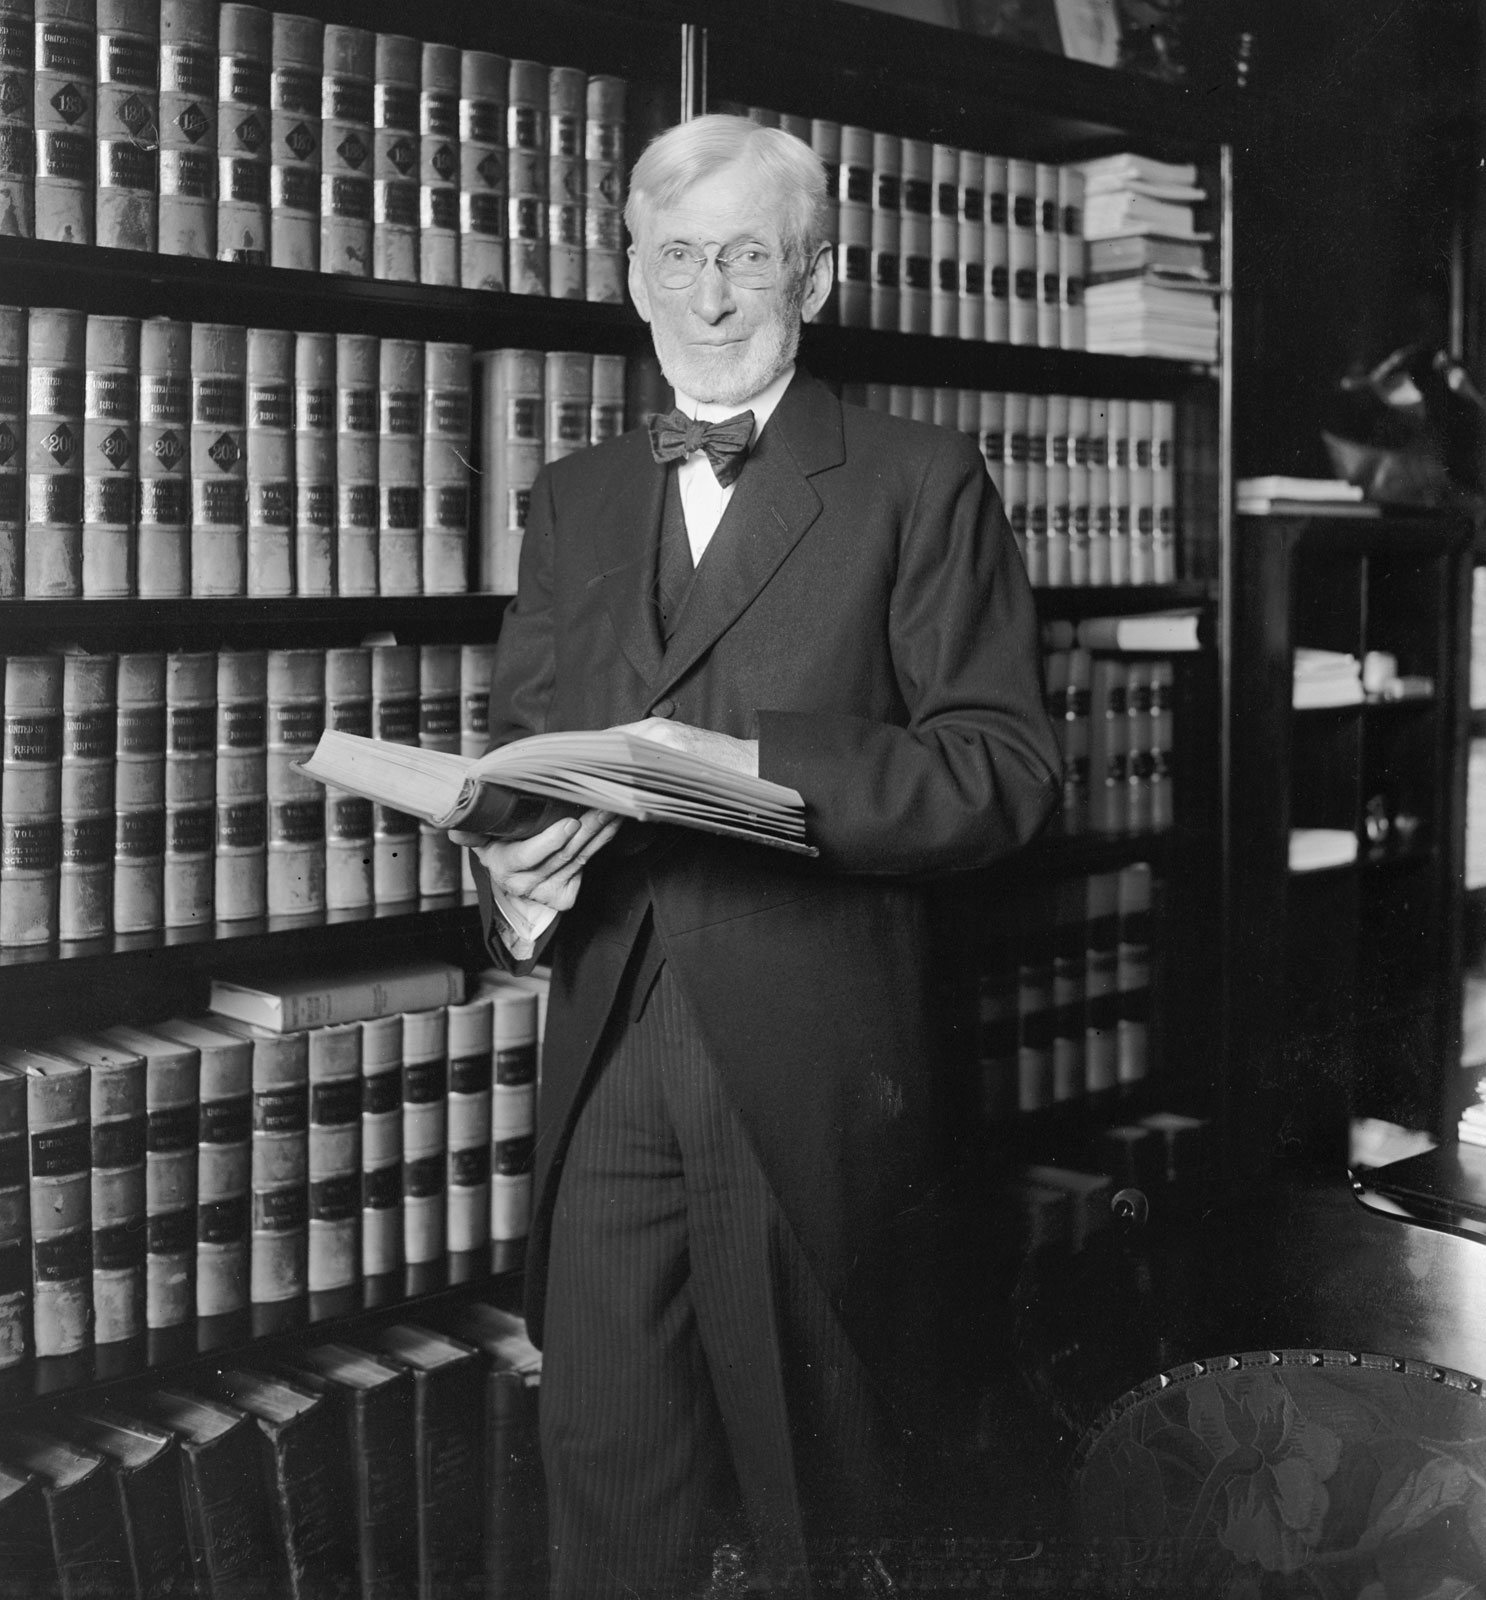 joseph mckenna standing in front of a book case